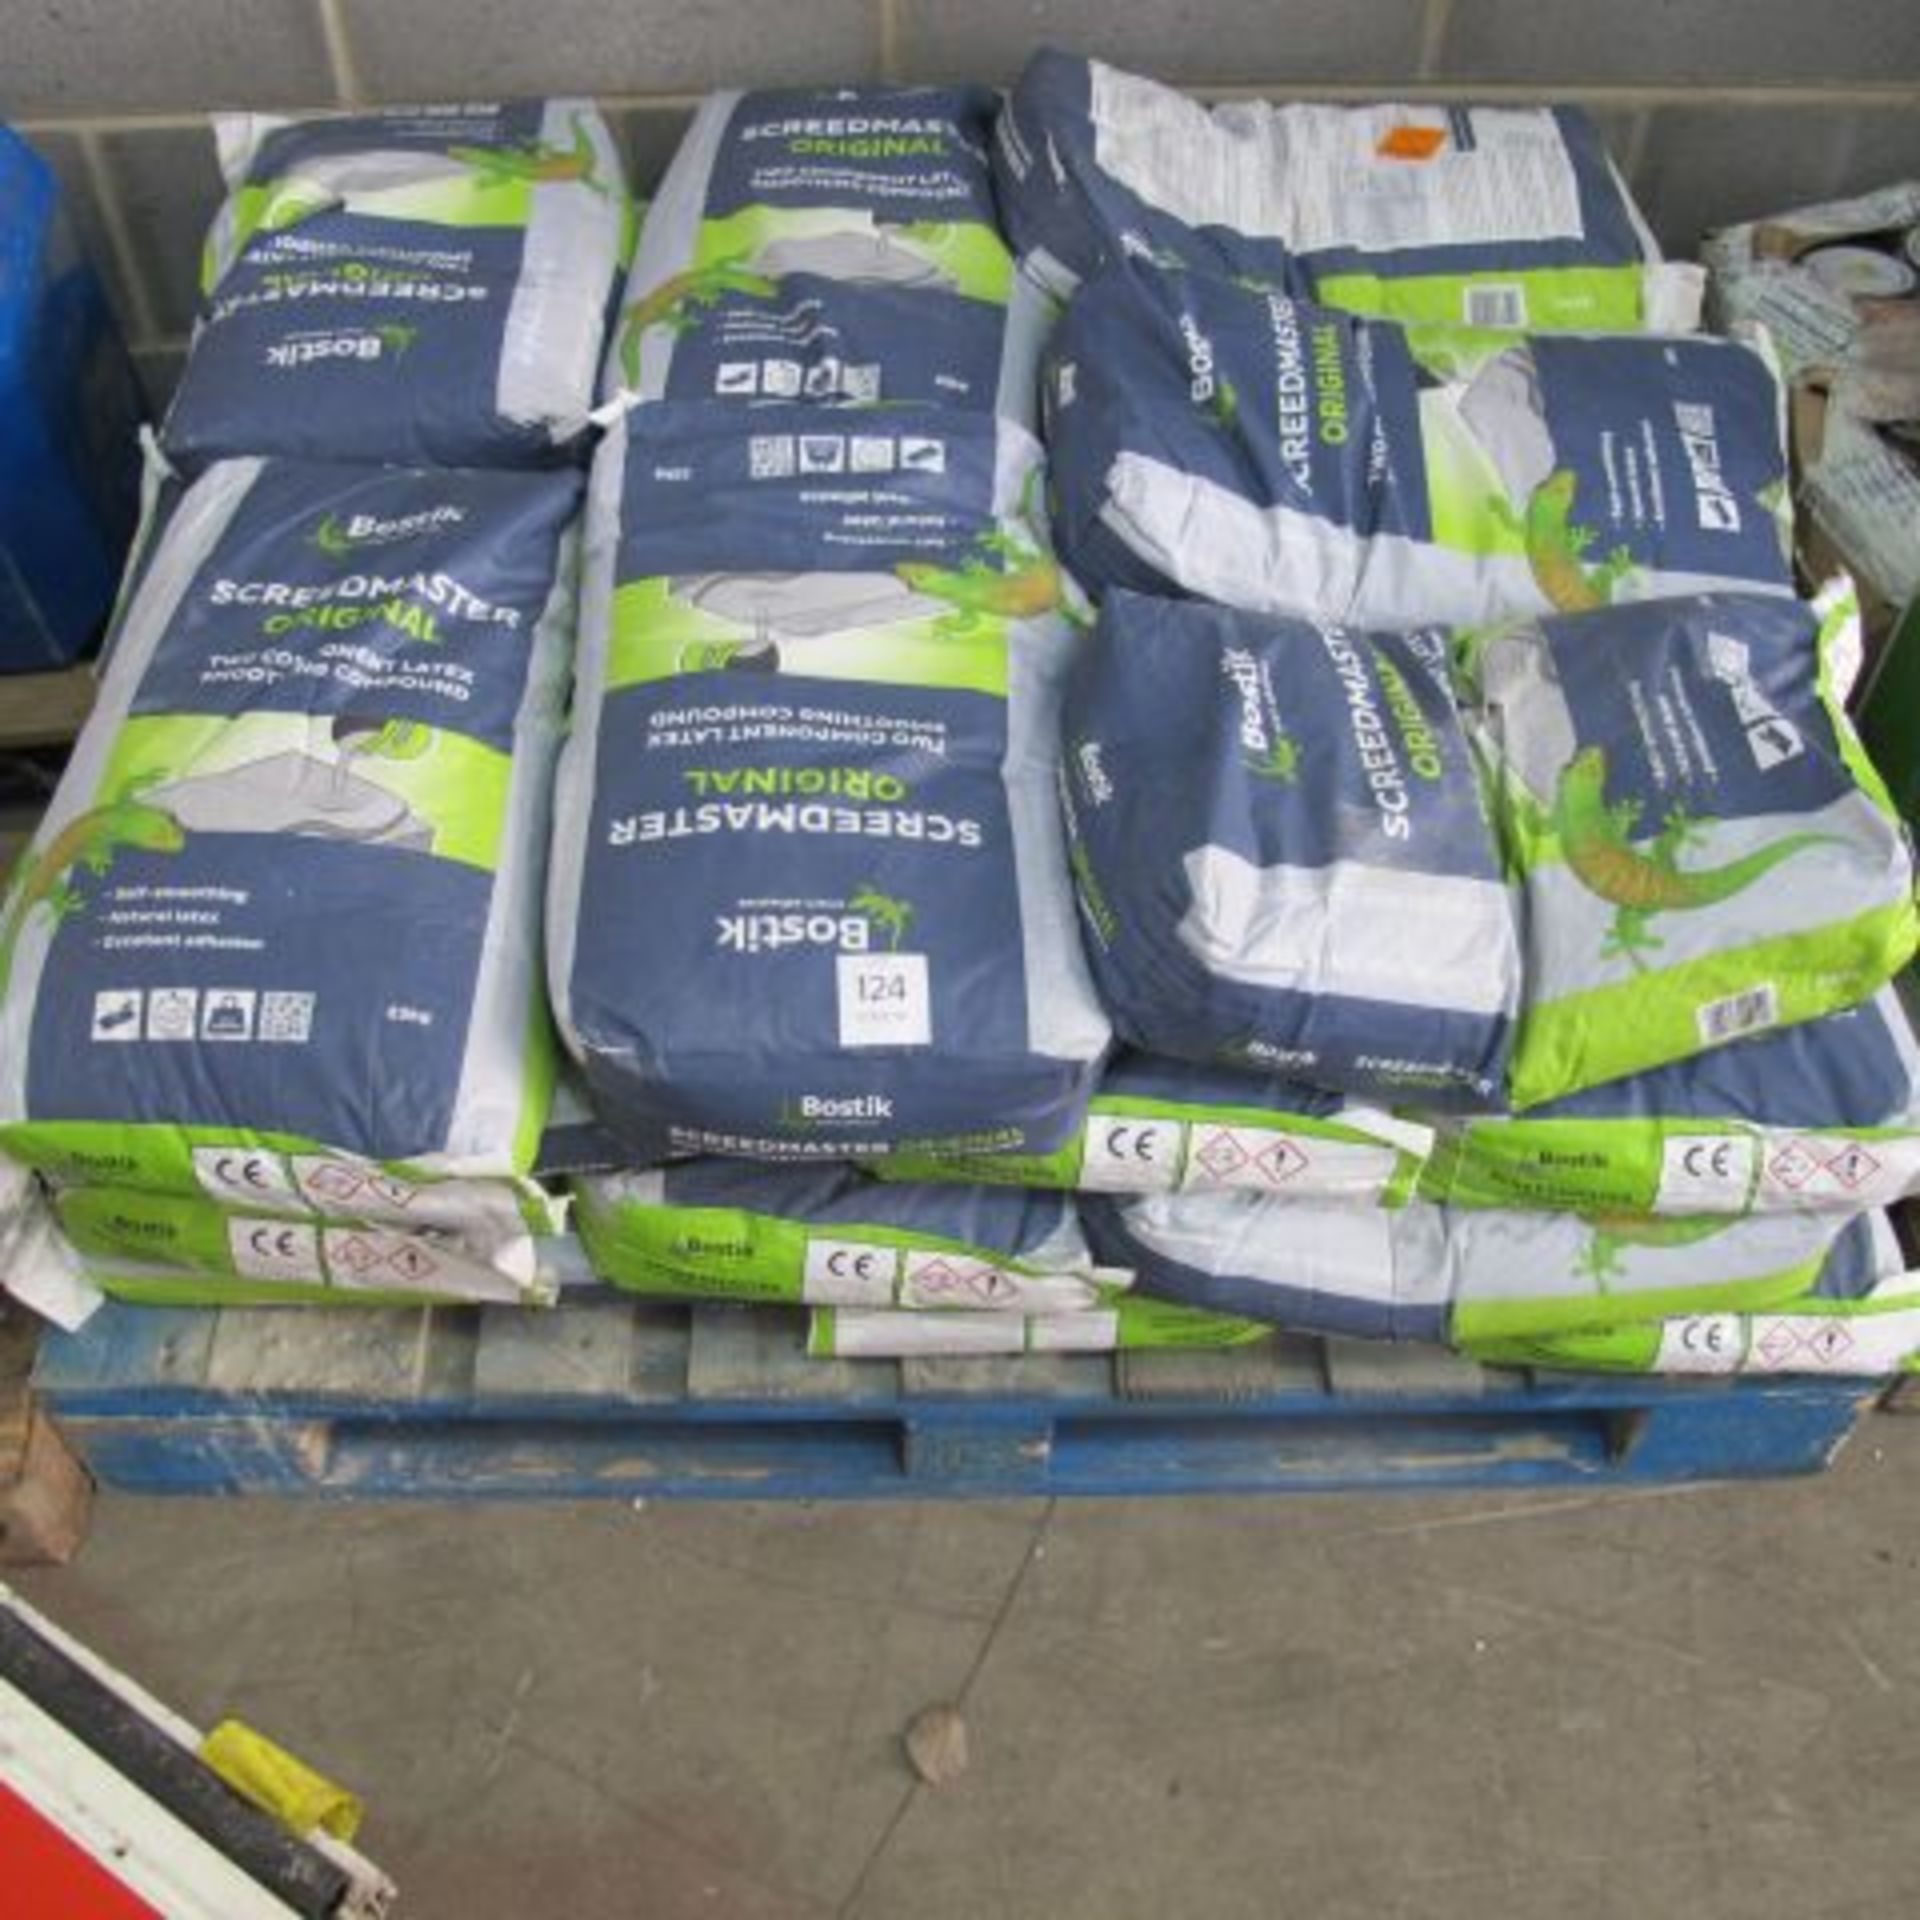 * A pallet containing a qty of Bostik Screedmaster Original. Approx 28 bags. Please note there is